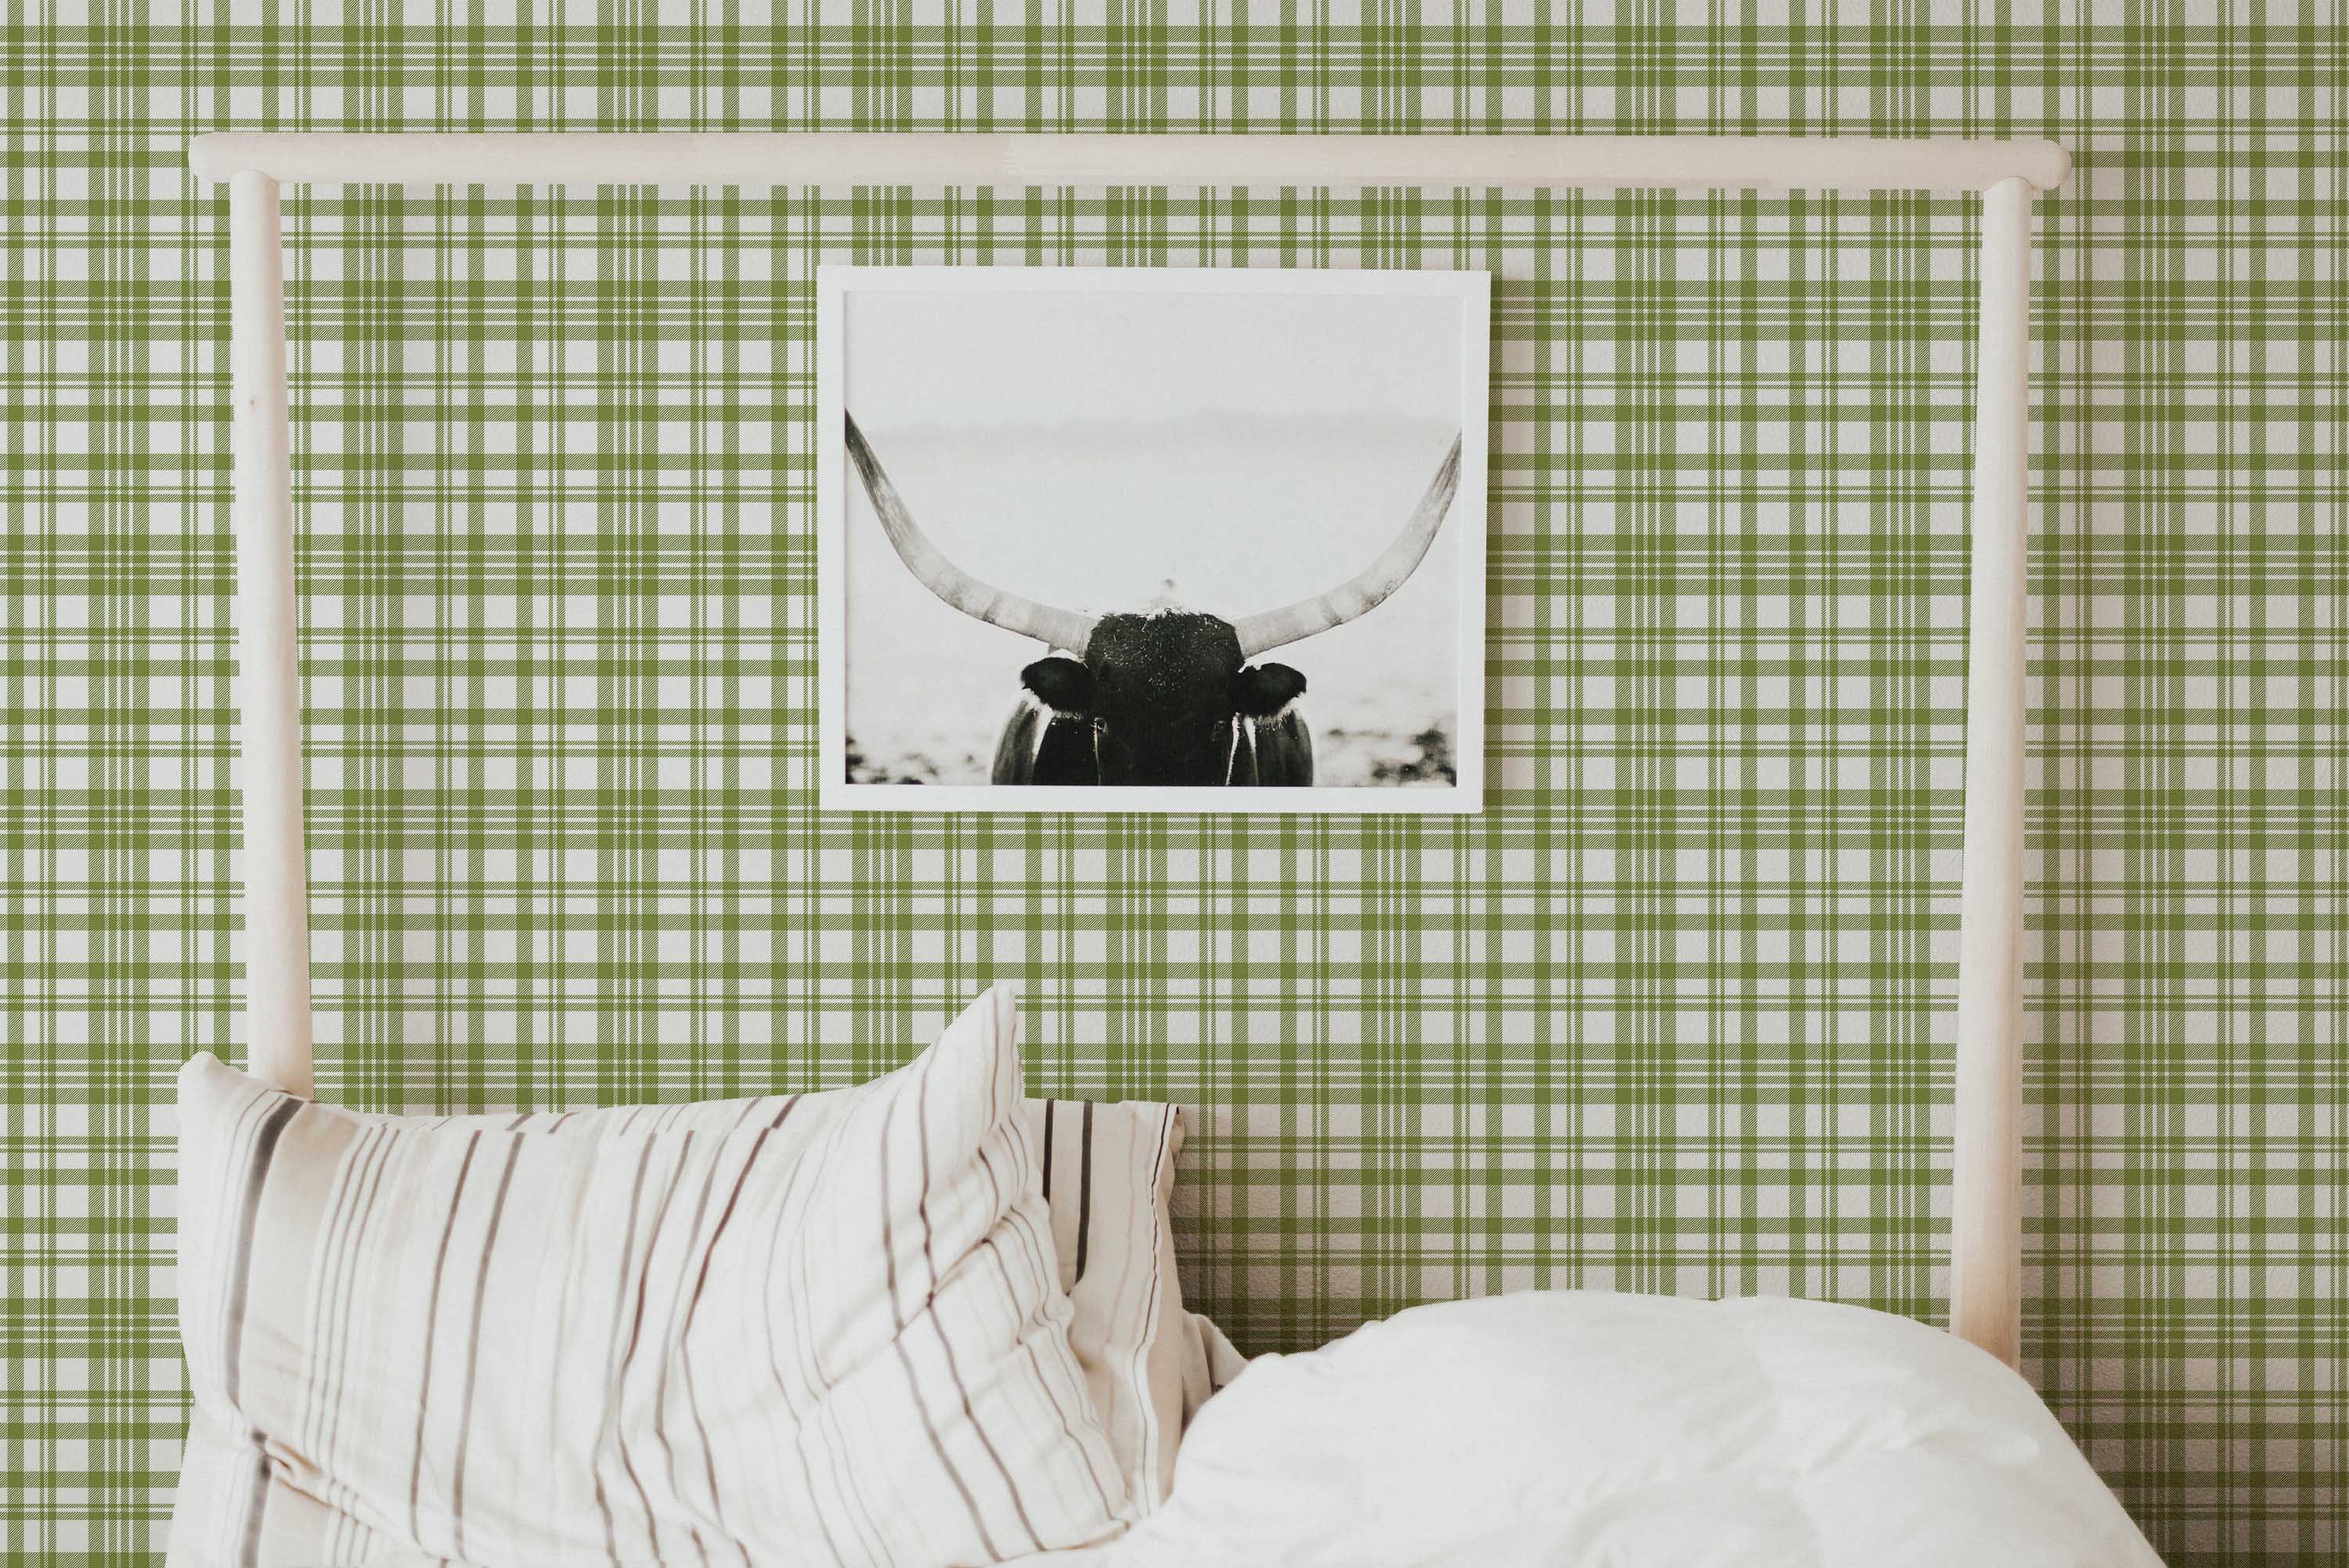 Green Plaid Peel and Stick Removable Wallpaper 6319 - 24in x 126in (61x320cm)